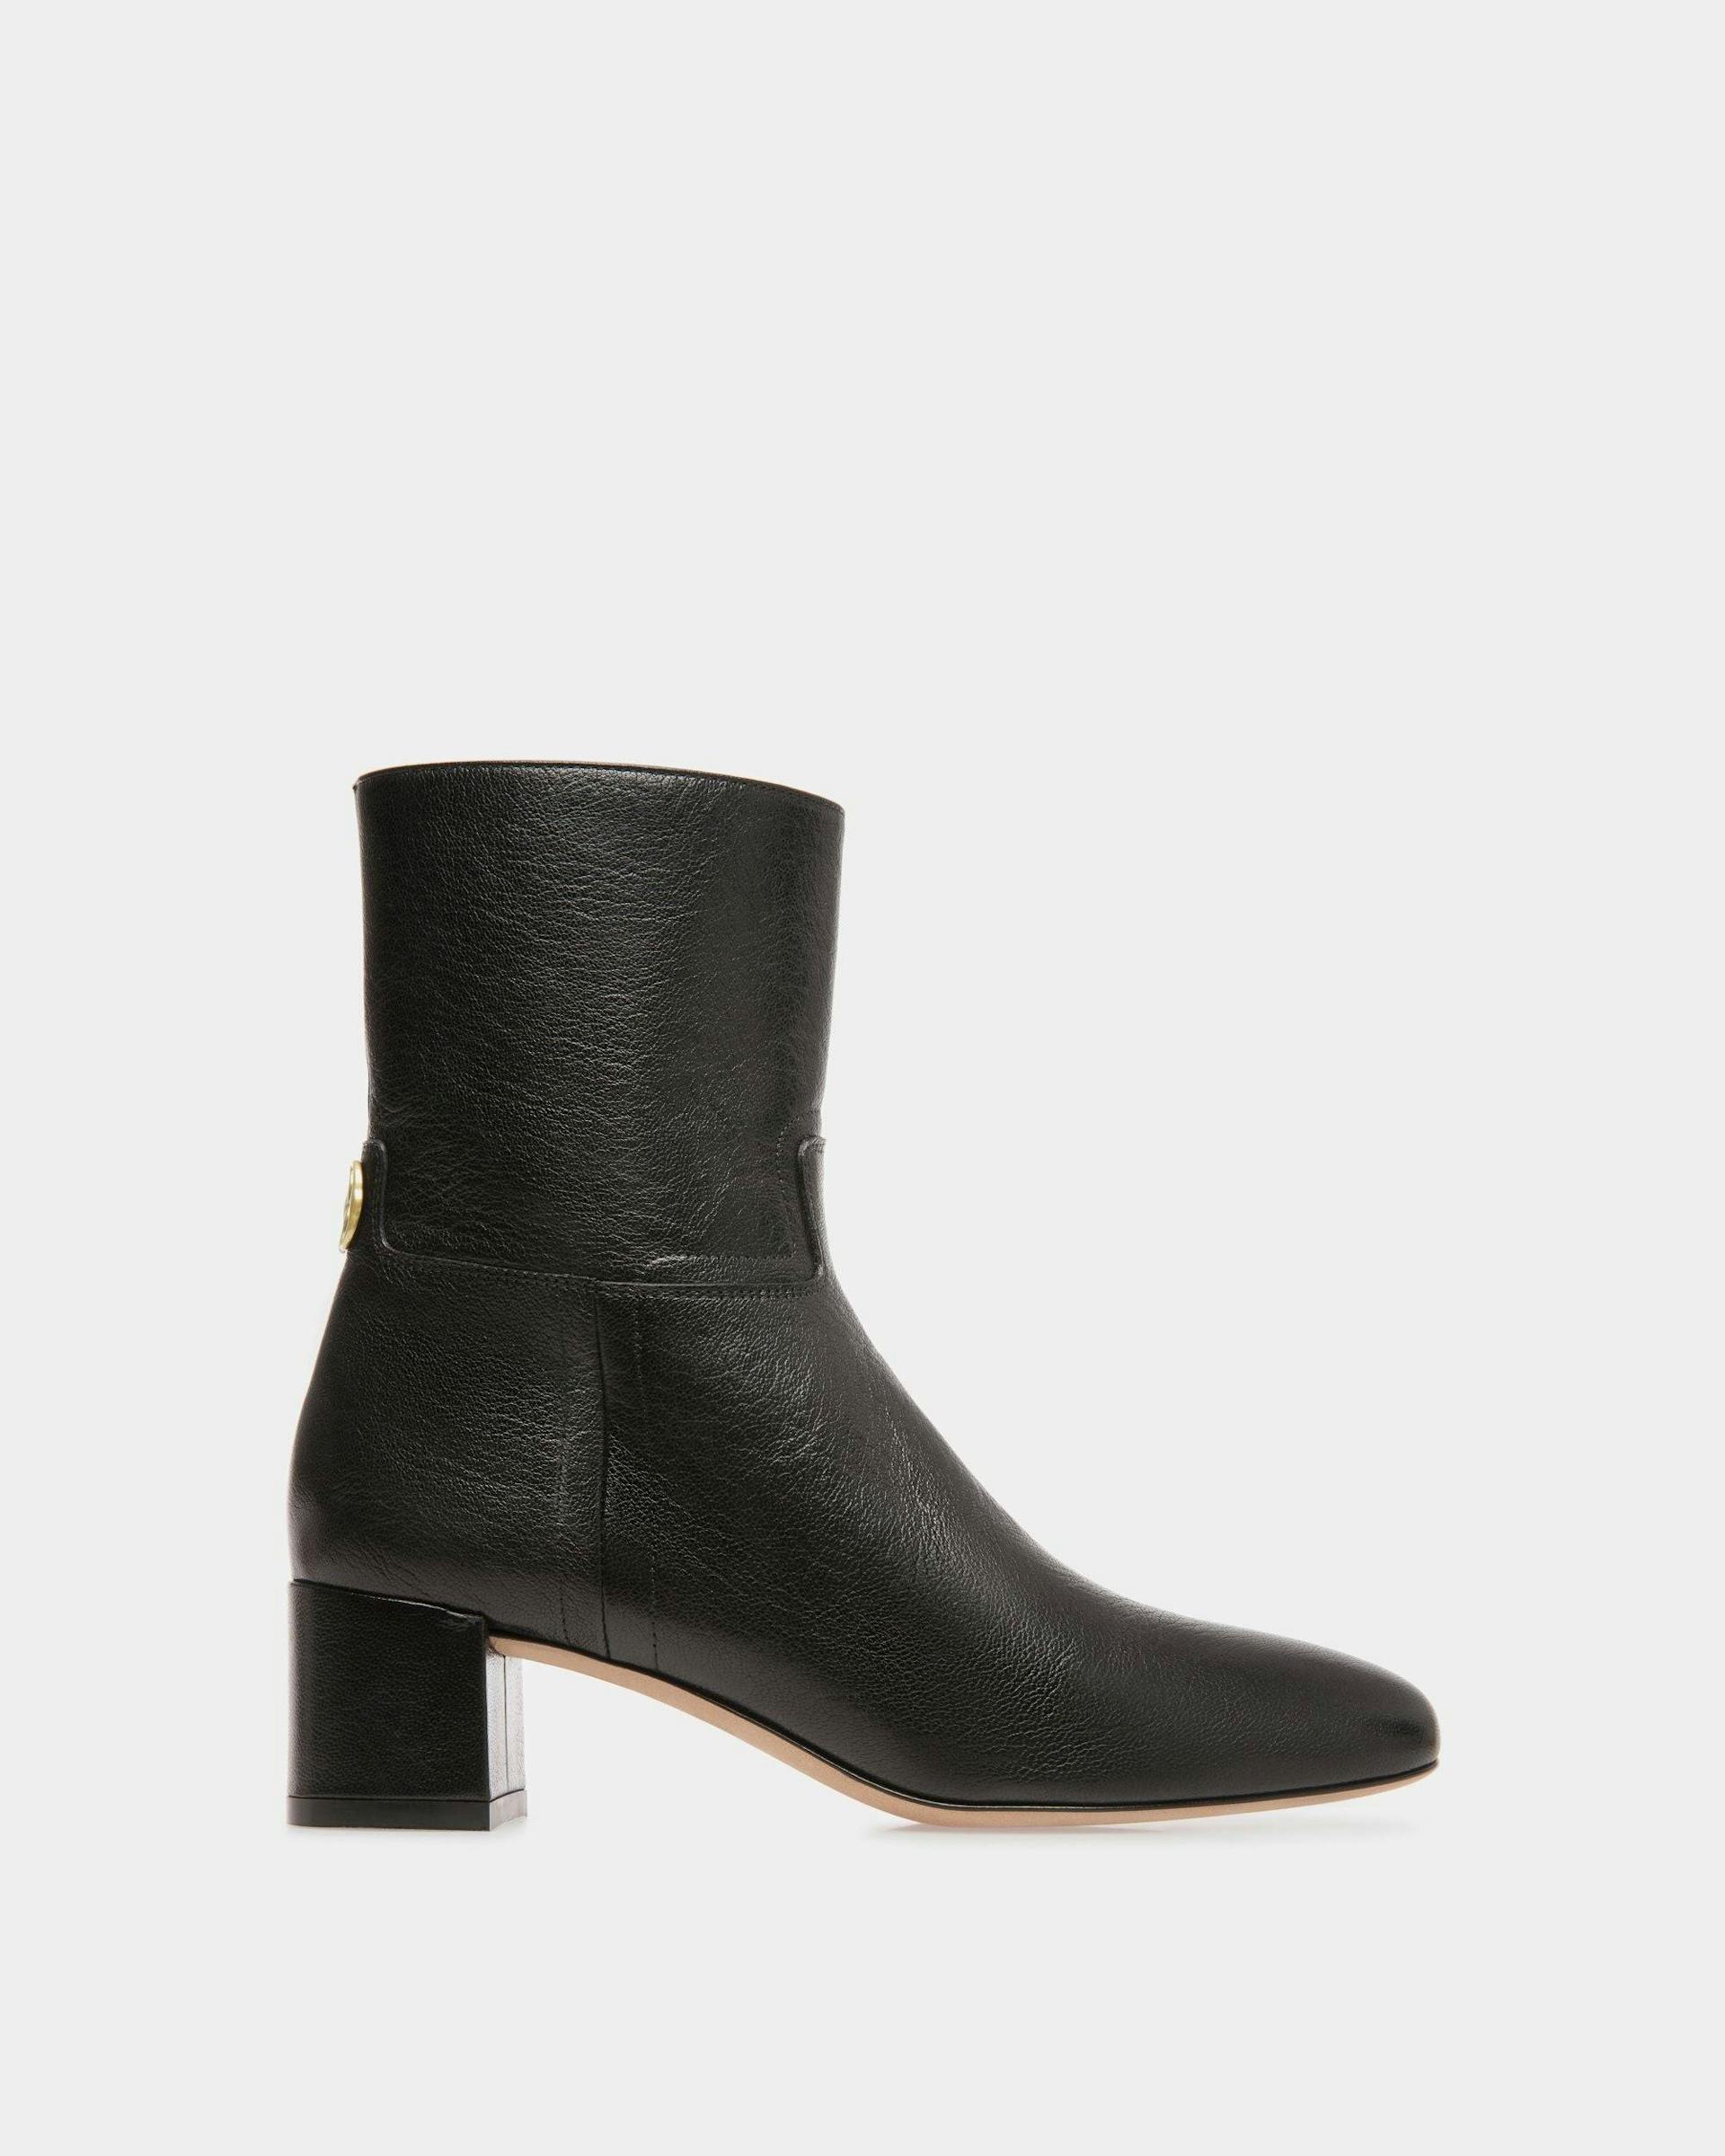 Women's Daily Emblem Booties In Black Leather | Bally | Still Life Side